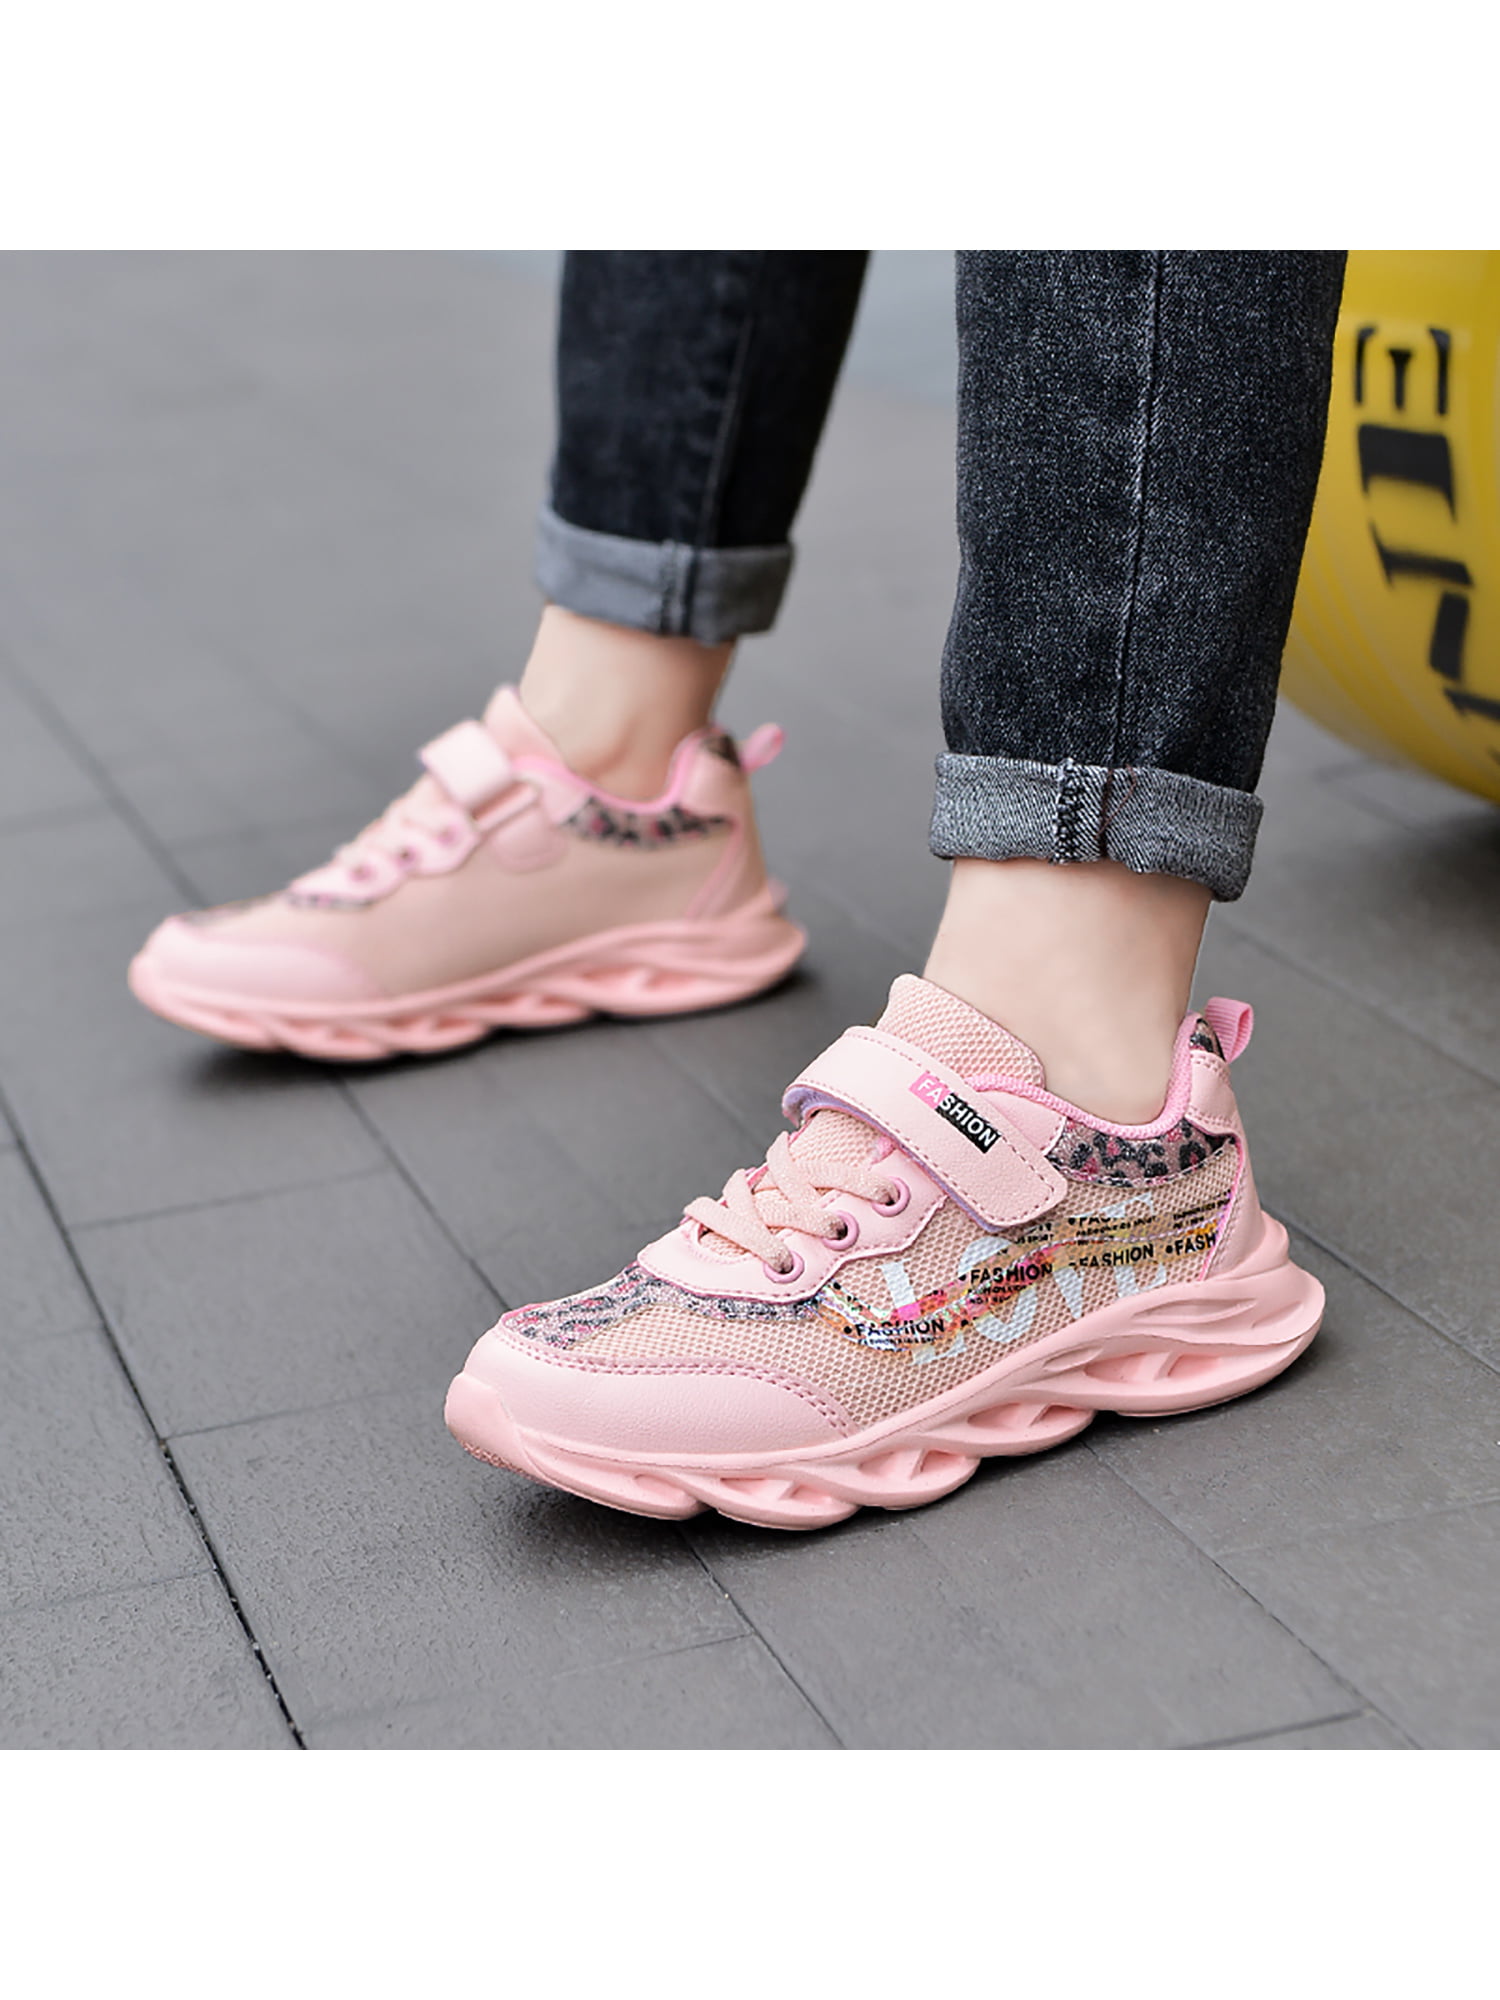 Kids Trainers Low Top Running Shoes Sneakers Infant Girls Boys Star Pattern School Sports Flat Shoes Hook & Loop Style Breathable Casual Shoes